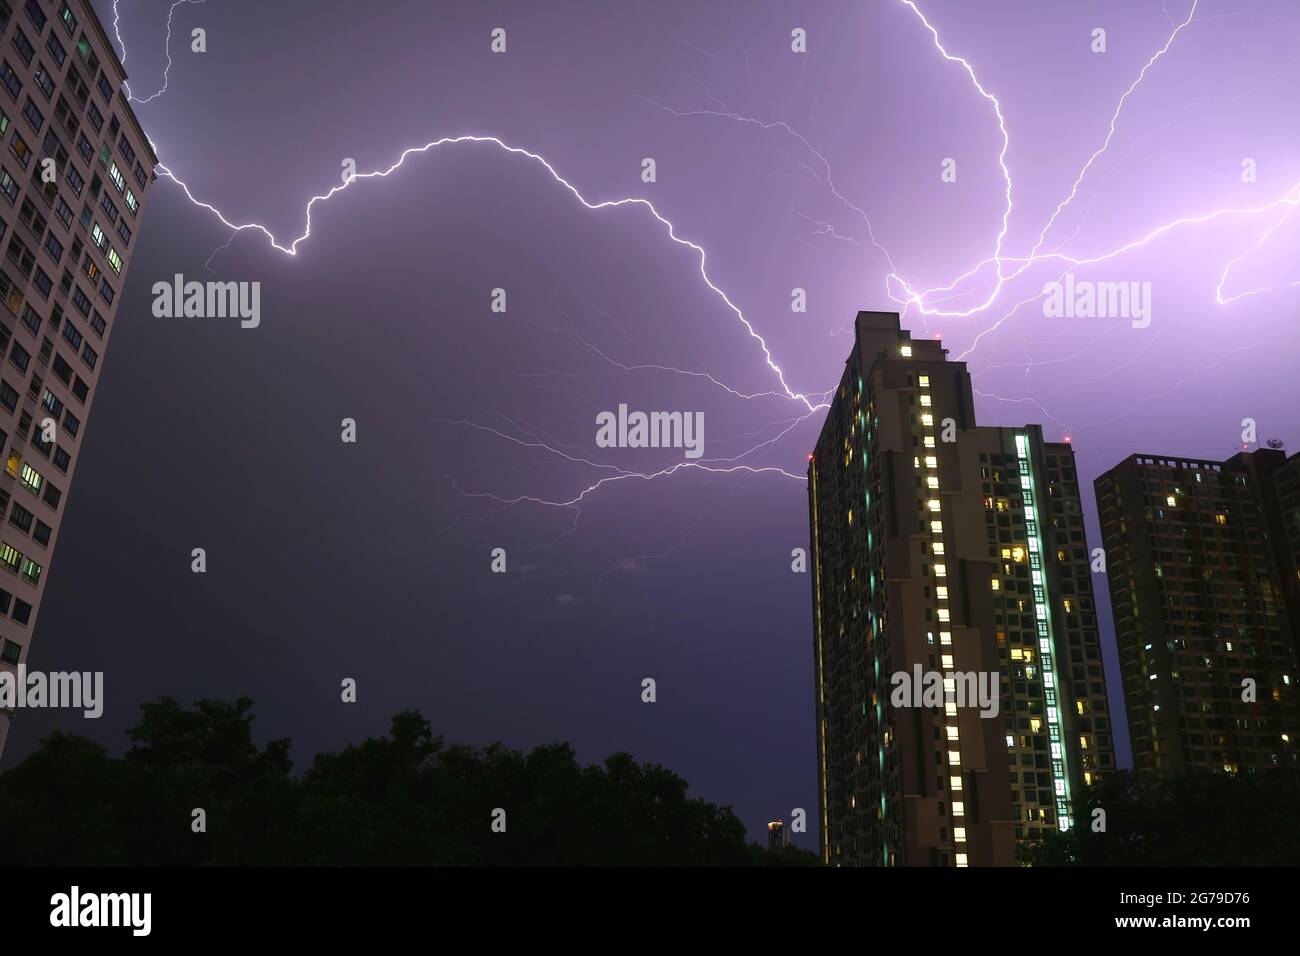 Incredible Real Lightning Strikes in the Urban Night Sky Stock Photo